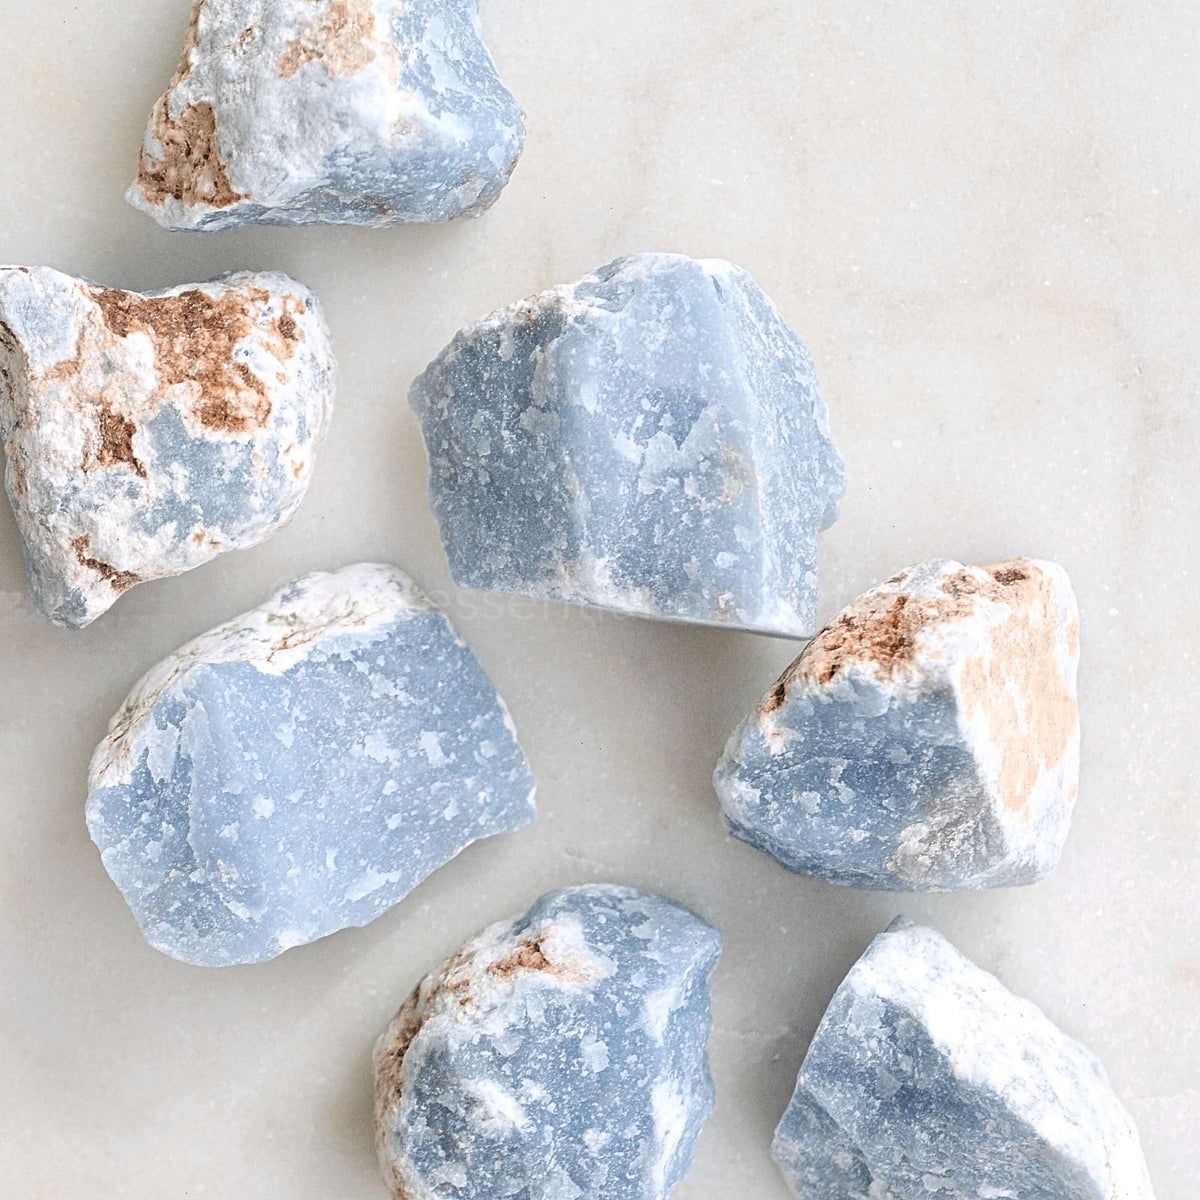 Raw angelite crystals on marble background